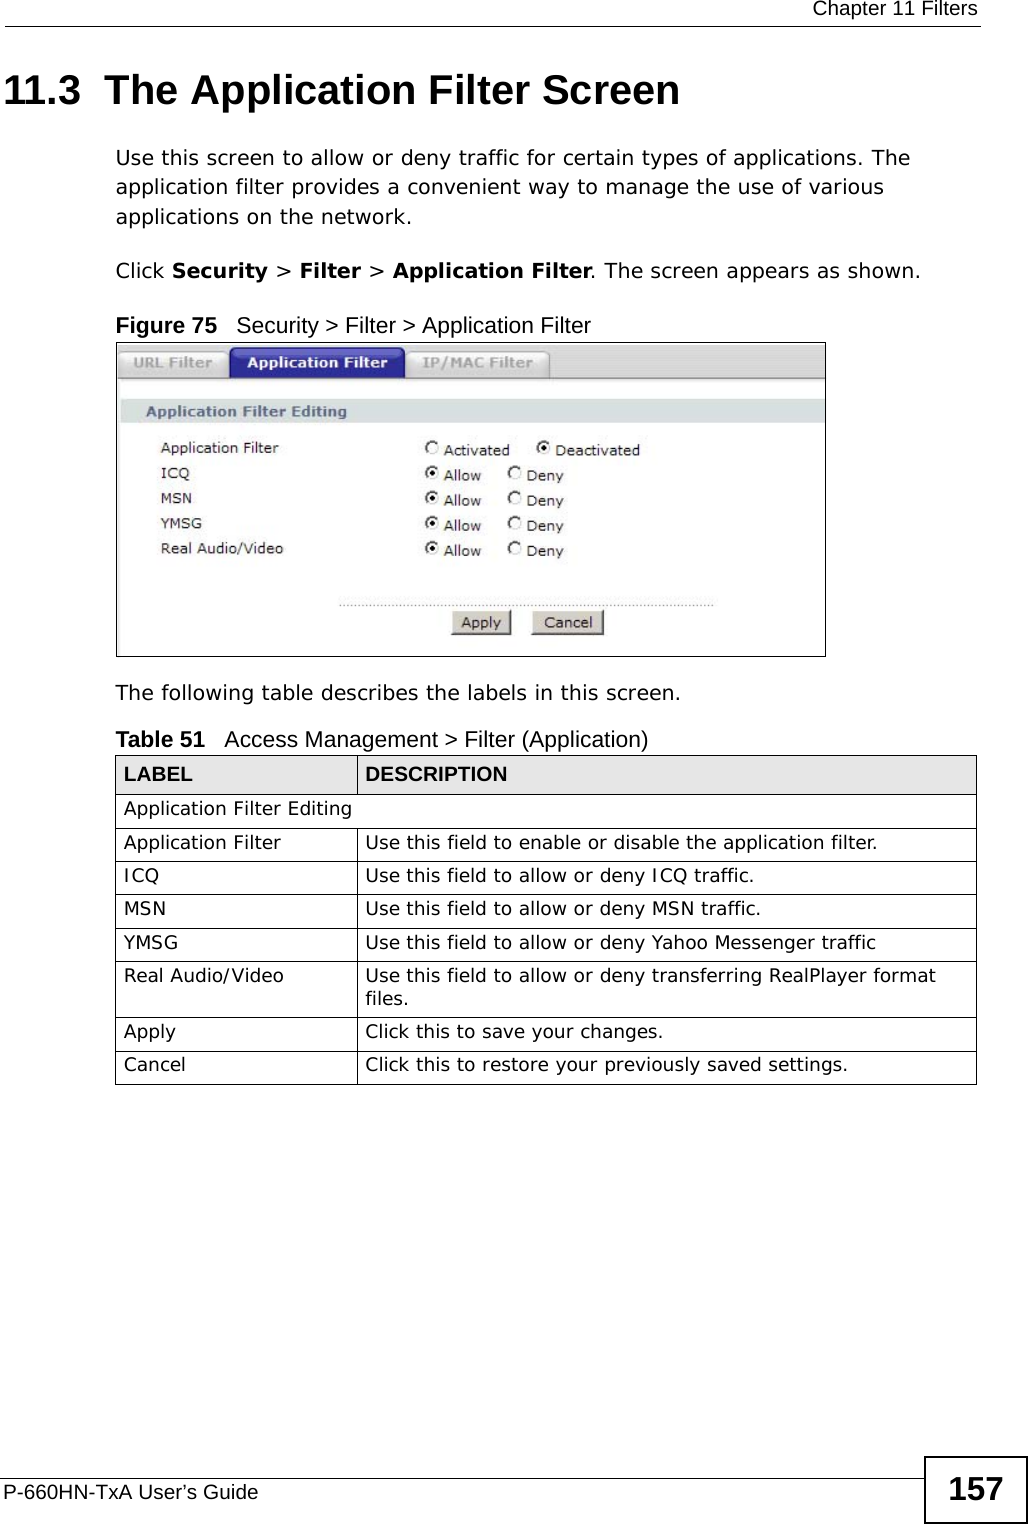  Chapter 11 FiltersP-660HN-TxA User’s Guide 15711.3  The Application Filter ScreenUse this screen to allow or deny traffic for certain types of applications. The application filter provides a convenient way to manage the use of various applications on the network.Click Security &gt; Filter &gt; Application Filter. The screen appears as shown.Figure 75   Security &gt; Filter &gt; Application FilterThe following table describes the labels in this screen. Table 51   Access Management &gt; Filter (Application)LABEL DESCRIPTIONApplication Filter EditingApplication Filter Use this field to enable or disable the application filter.ICQ Use this field to allow or deny ICQ traffic.MSN Use this field to allow or deny MSN traffic.YMSG Use this field to allow or deny Yahoo Messenger trafficReal Audio/Video Use this field to allow or deny transferring RealPlayer format files.Apply Click this to save your changes.Cancel Click this to restore your previously saved settings.